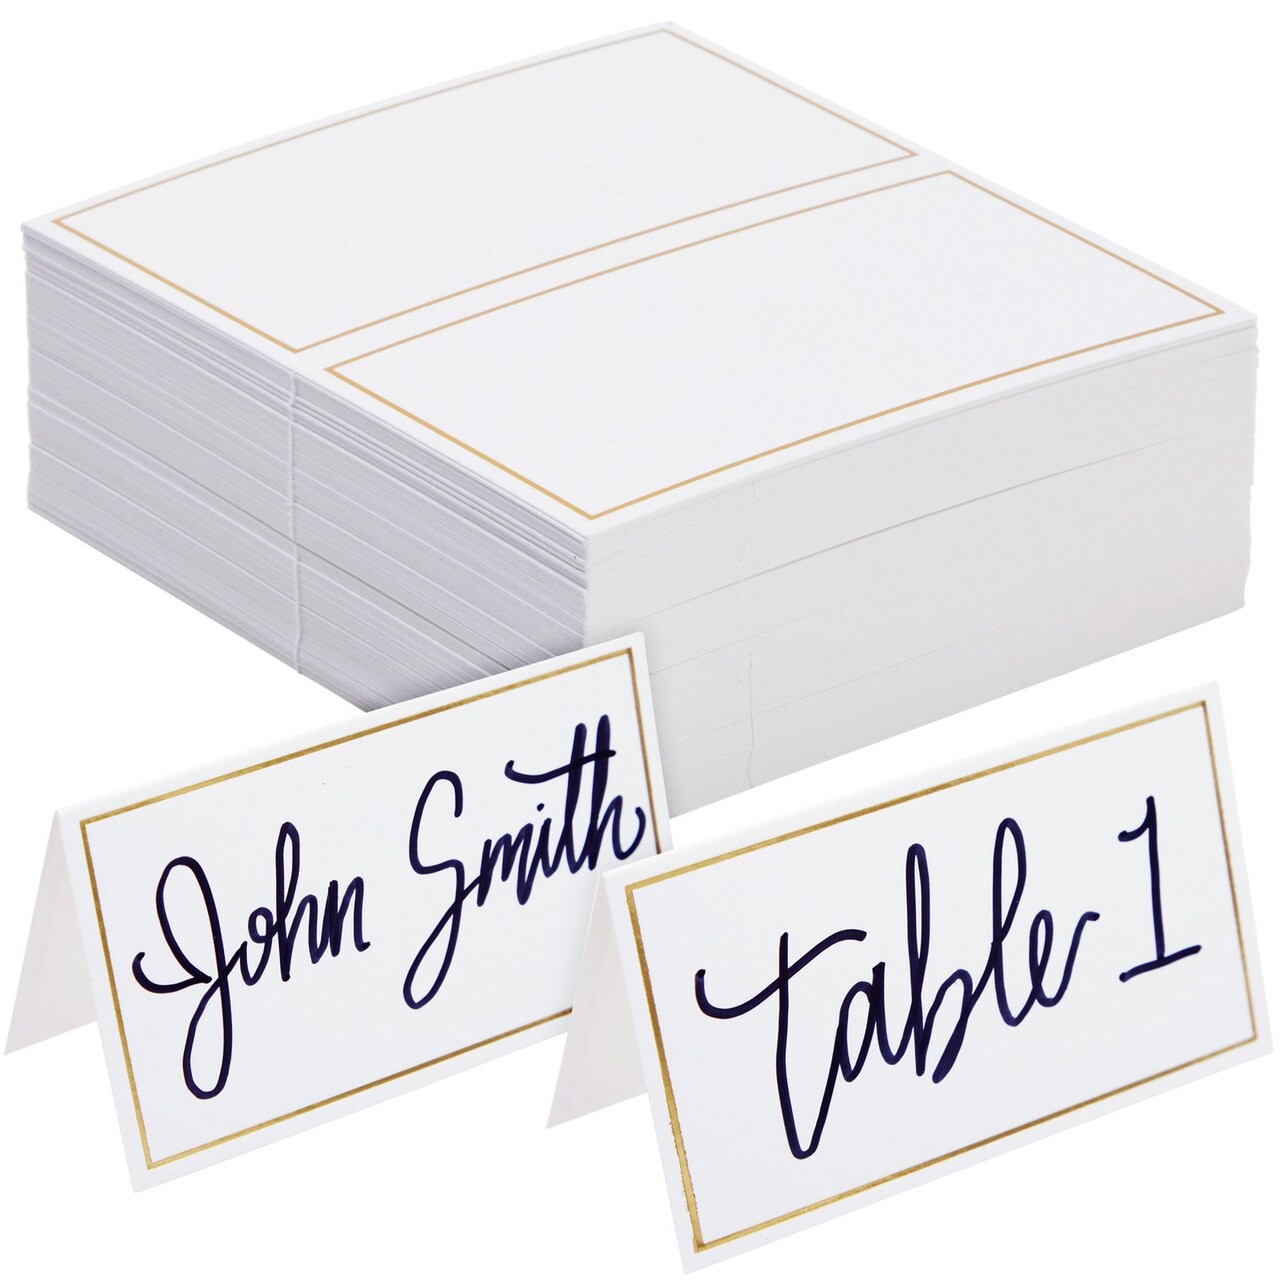 100 Pack Name Cards for Table Setting - Tent Place Cards with Gold Foil Border for Wedding, Banquets, Events, Reserved Seating (3.5 x 2 In)